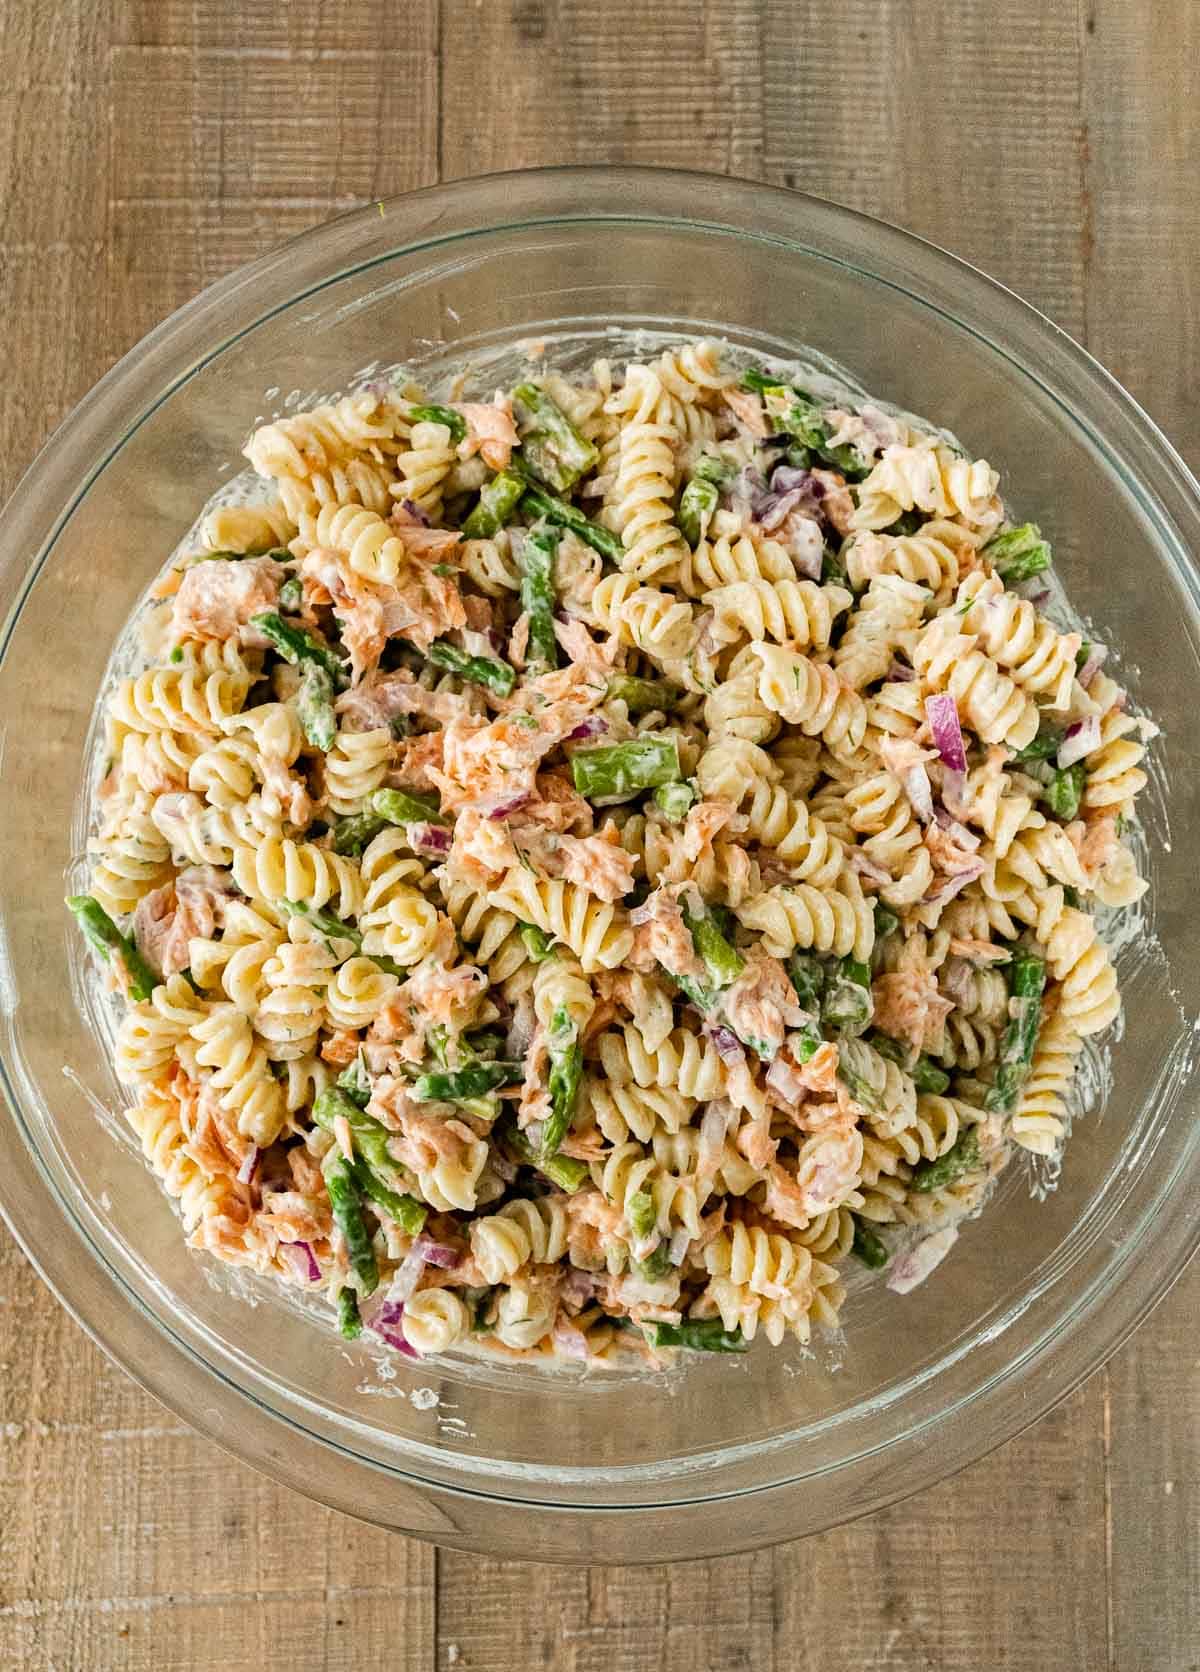 mixed Dill Salmon Pasta Salad in a bowl